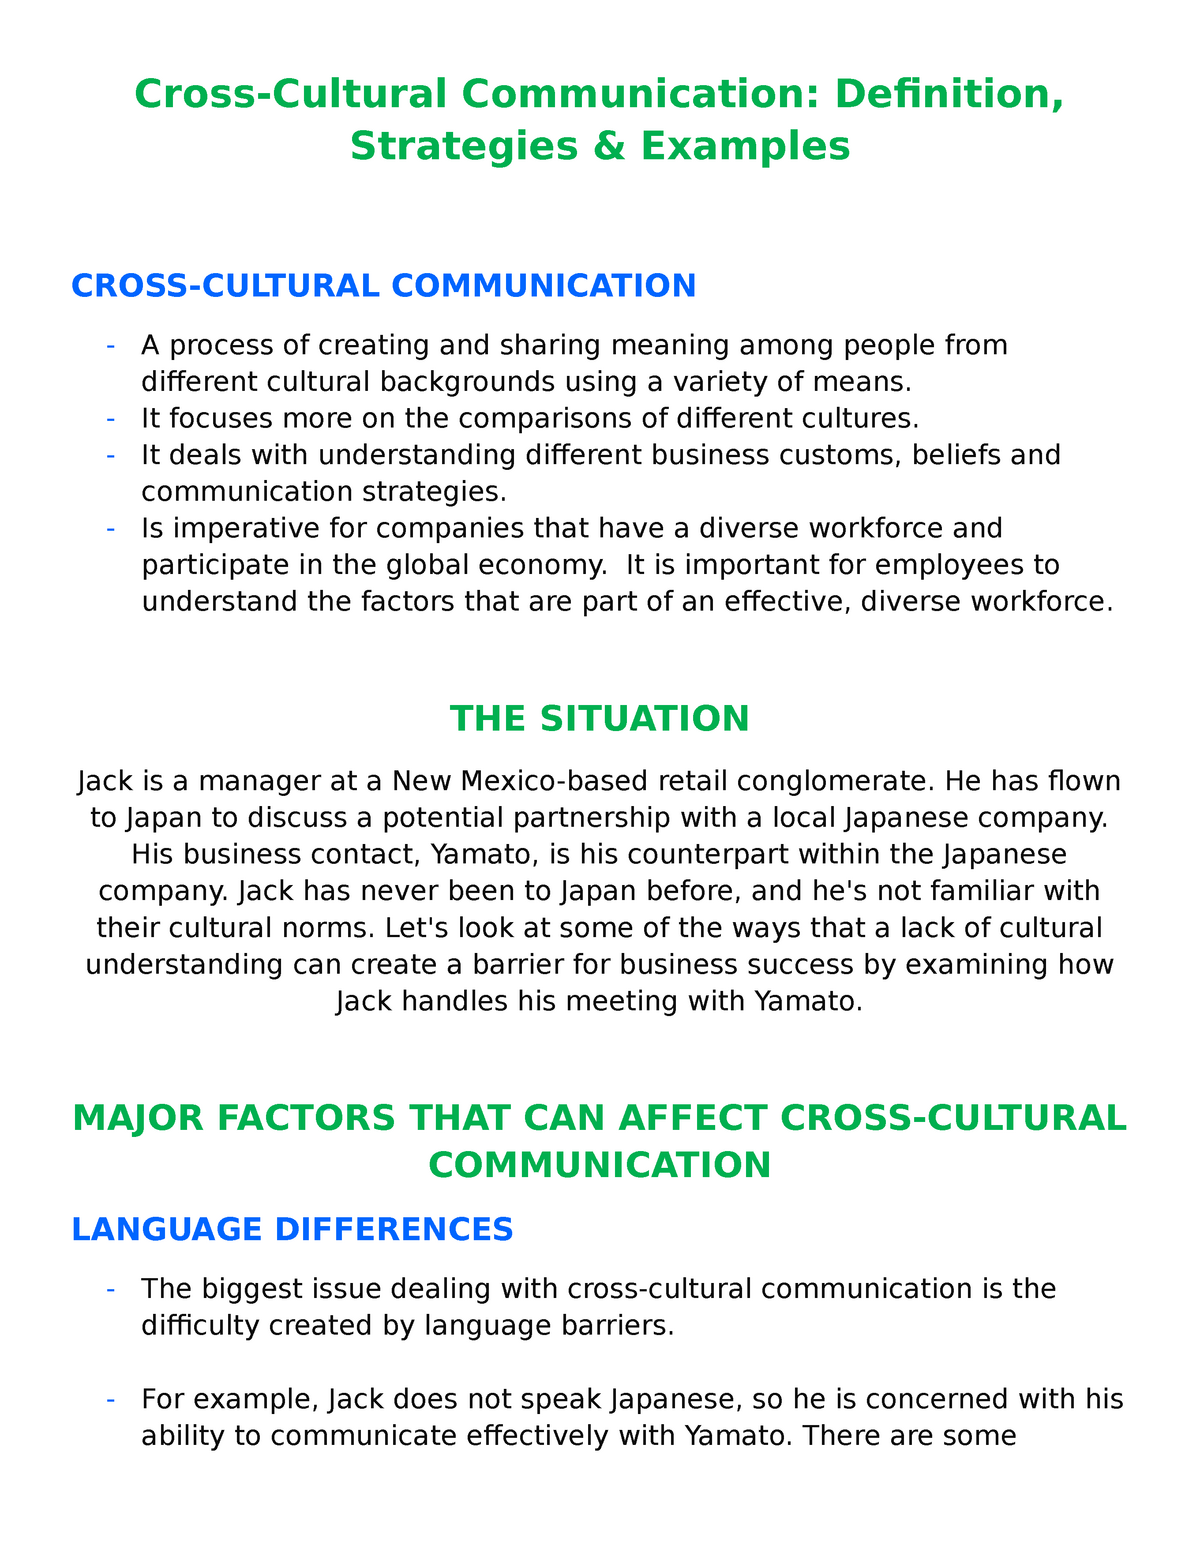 research paper on various cultural and intercultural modes of communication